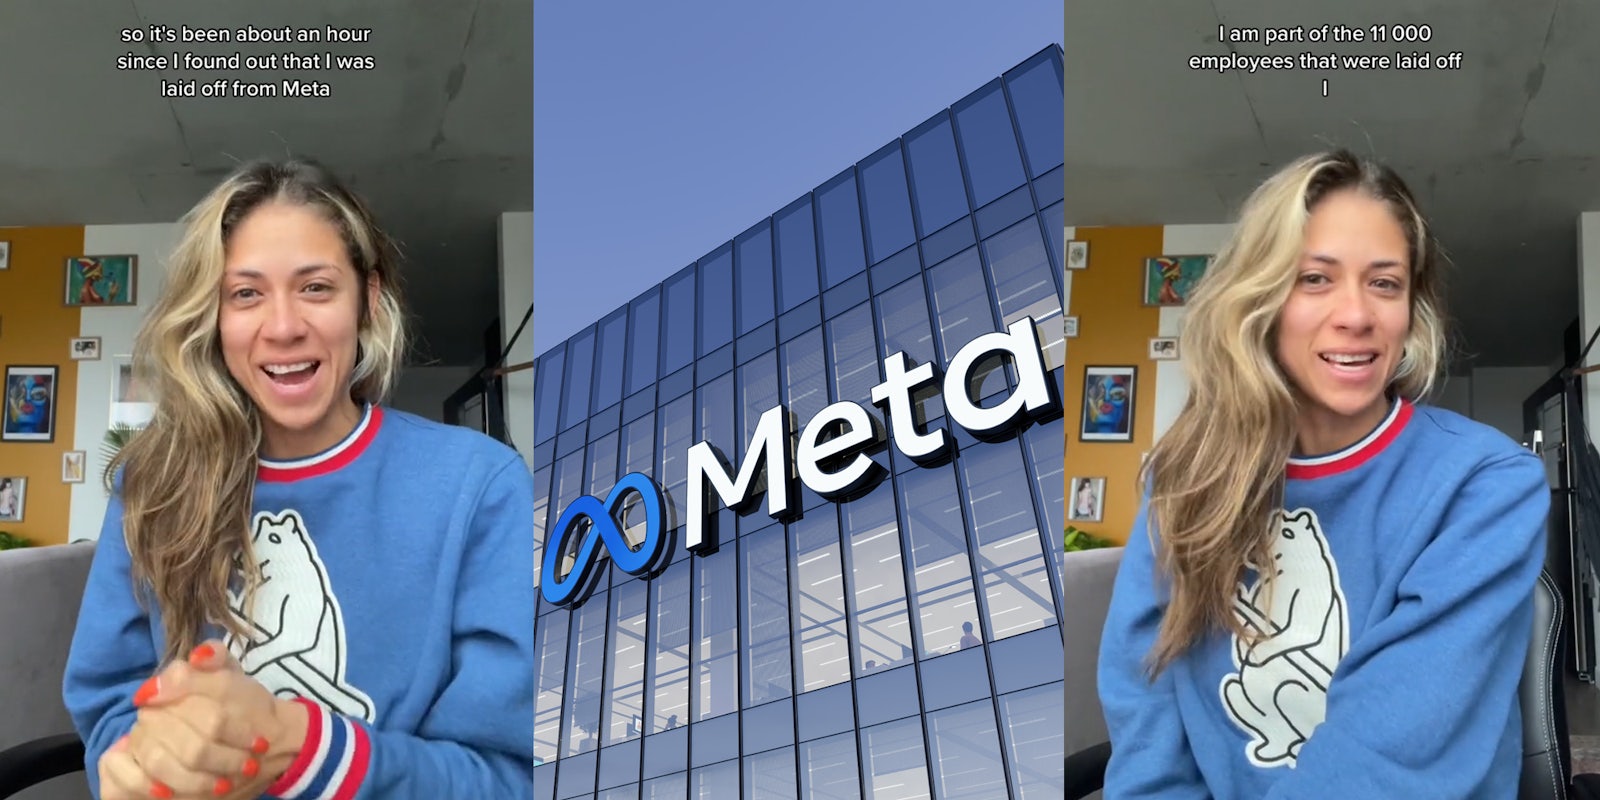 Ex Meta employee speaking caption 'so it's been about an hour since I found out that I was laid off from Meta' (l) Meta logo on corporate building (c) Ex Meta employee speaking caption 'I am part of the 11 000 employees that were laid off' (r)